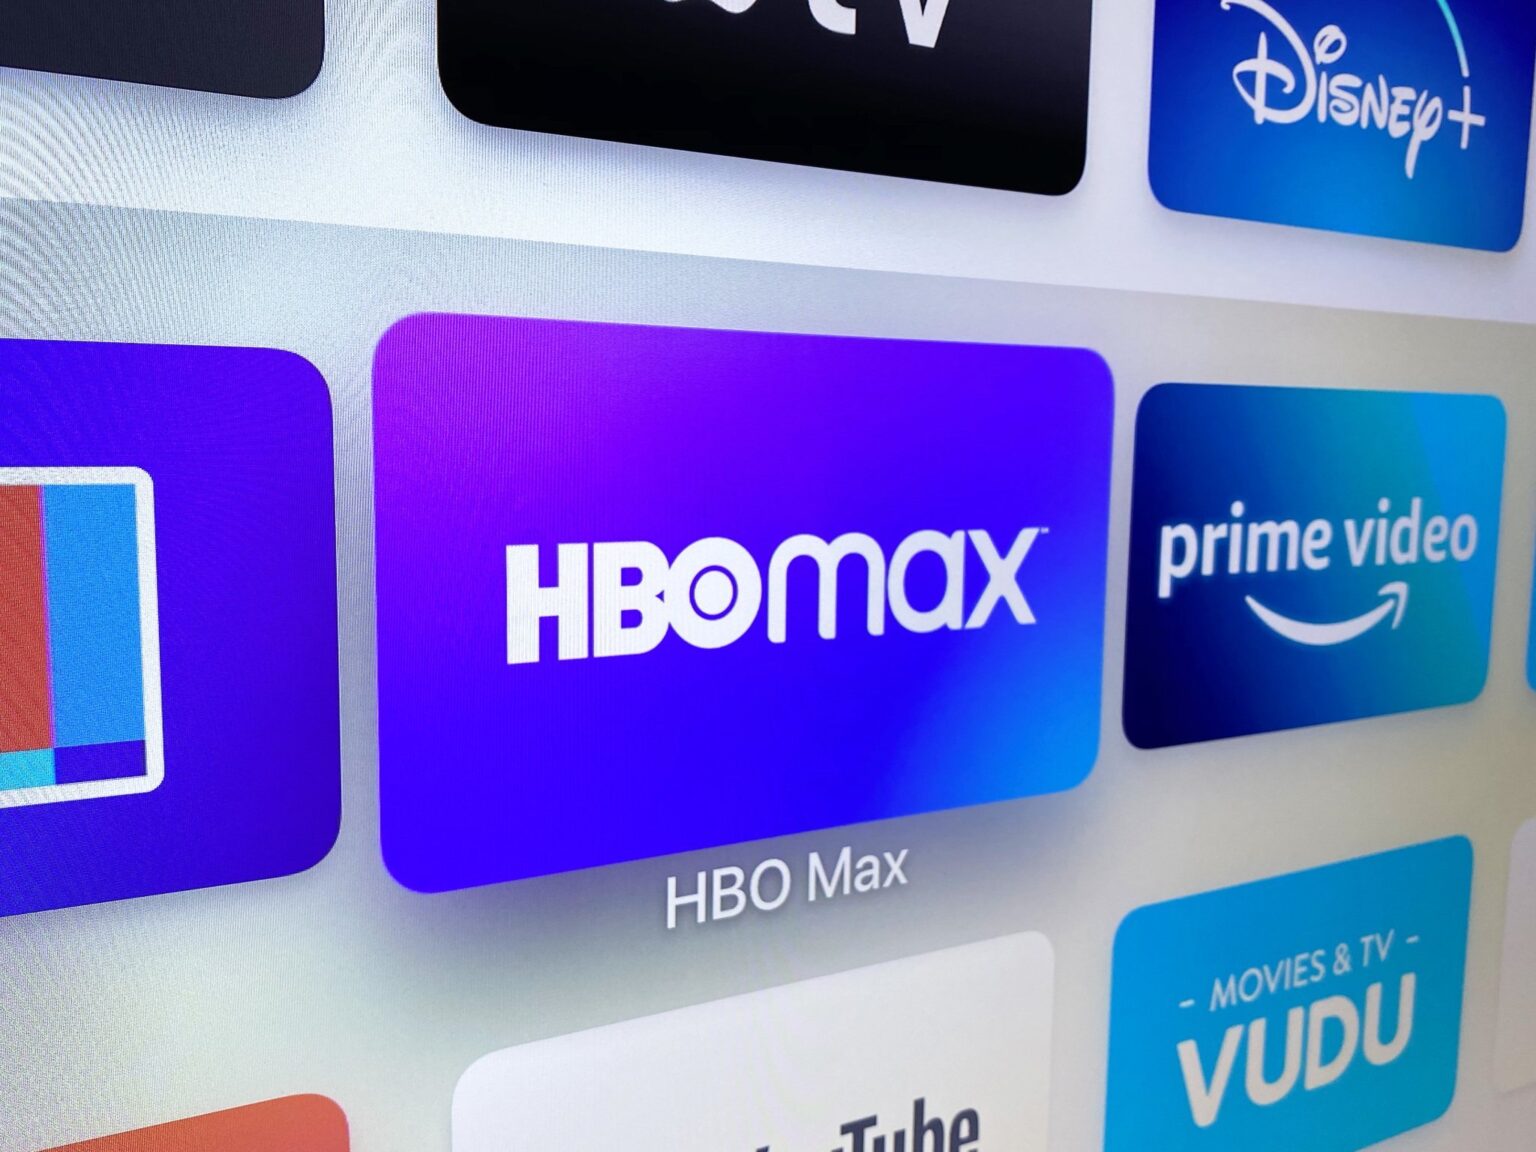 HBO Max was, after all, the only place to get access to exclusive movies. What's the price? Here are all the ways you can get your own free account.